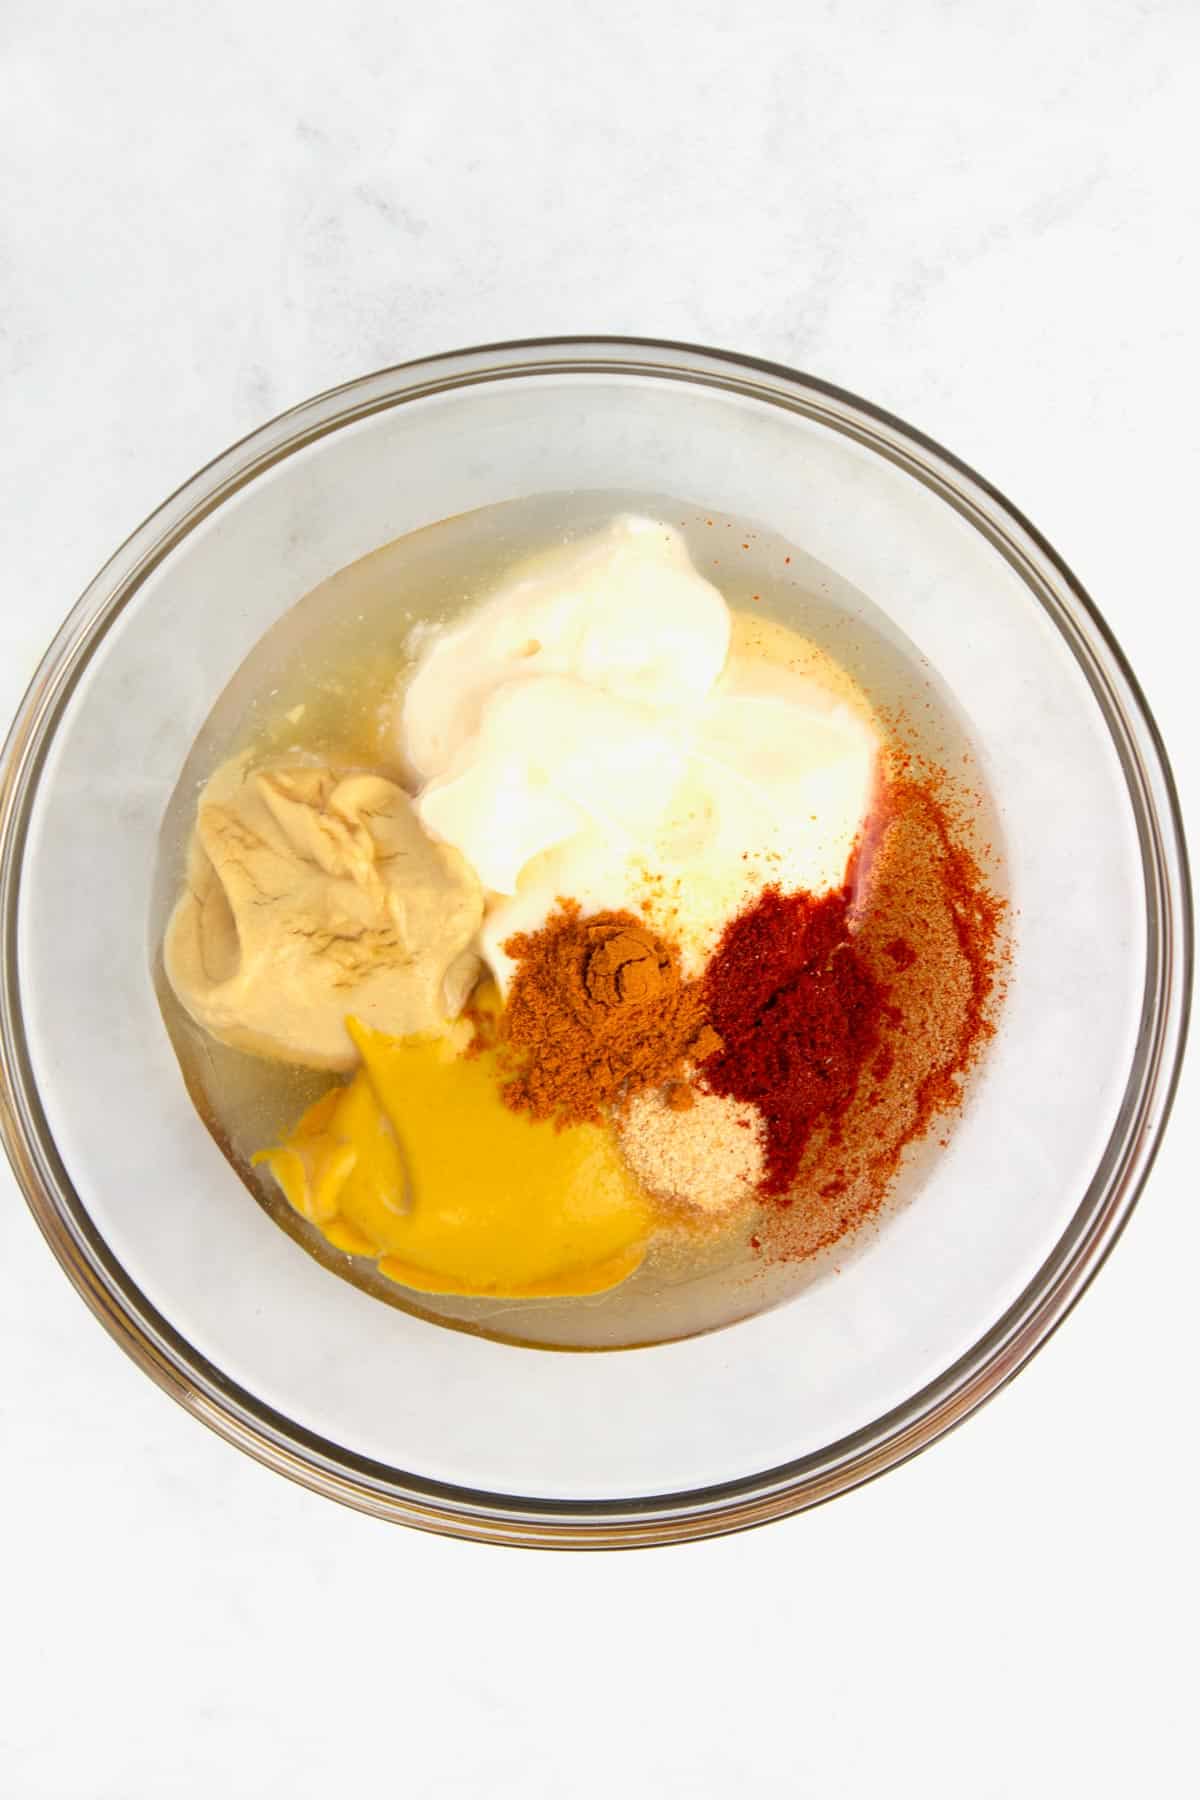 An overhead view of a clear glass bowl with piles of mayo, mustard, lemon juice, honey, and spices unmixed in the bowl.